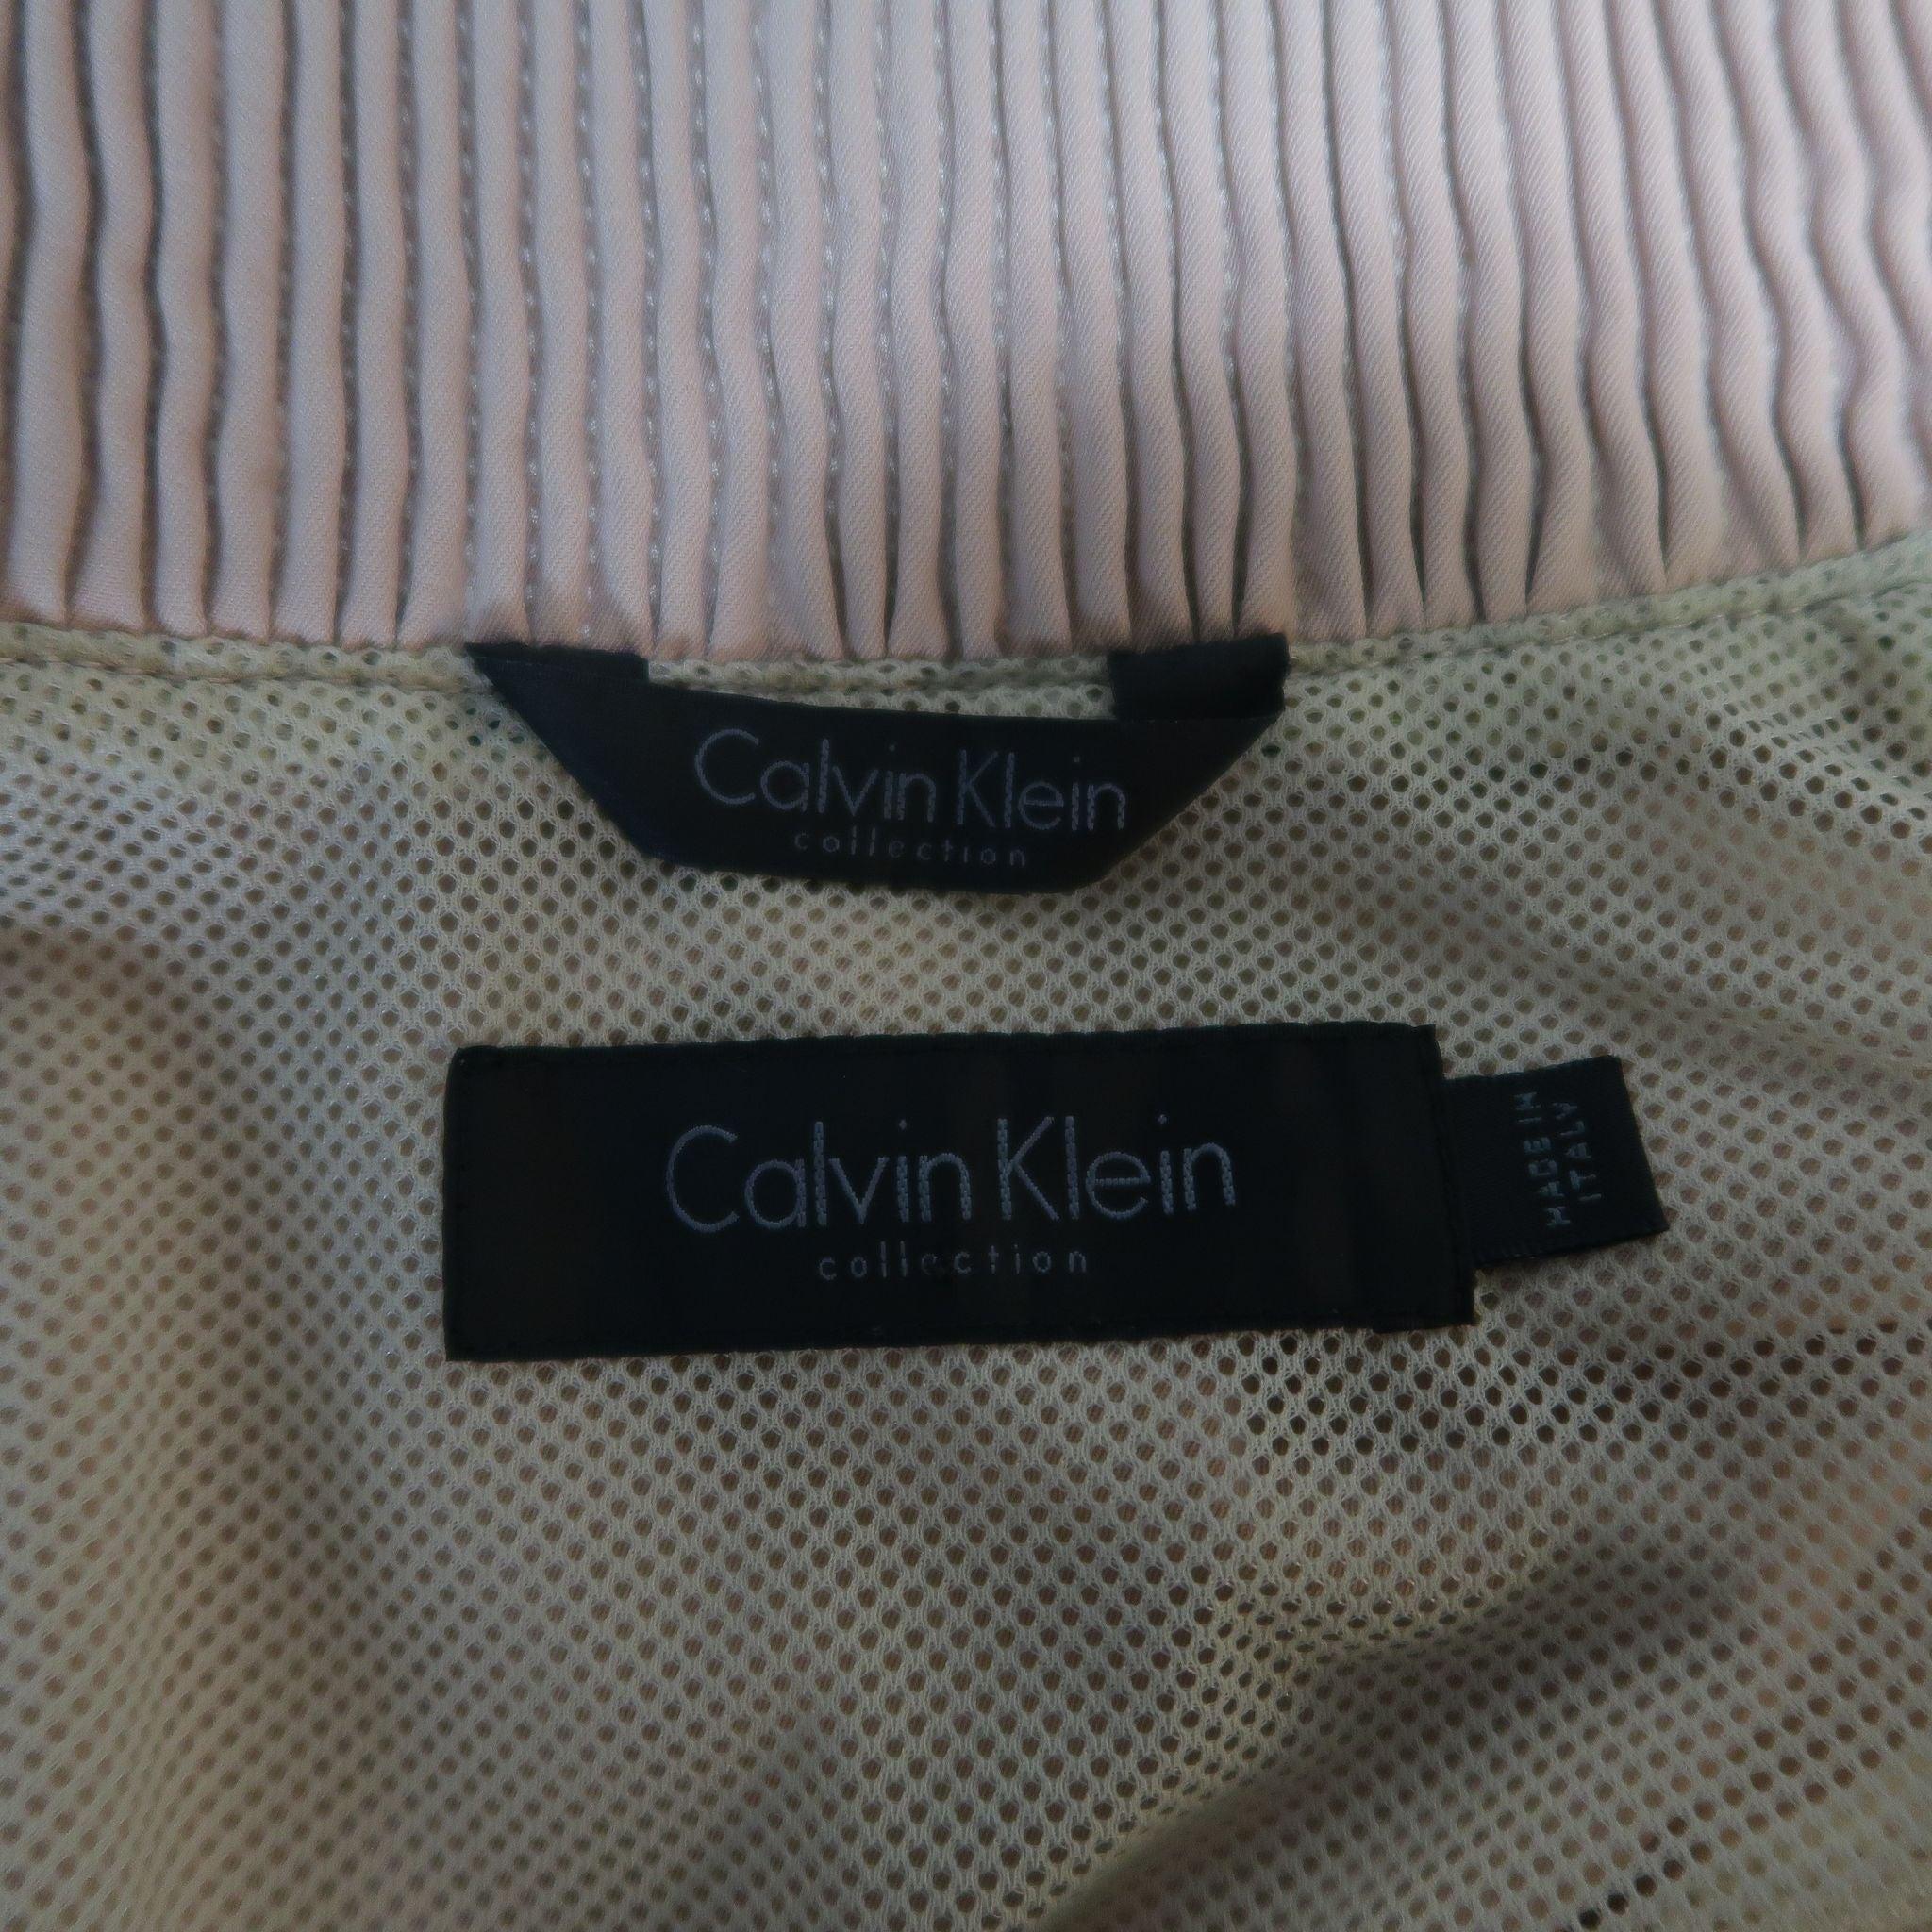 CALVIN KLEIN COLLECTION Spring 2015 Runway 38 Blush Nude Tan Bomber Jacket For Sale 6